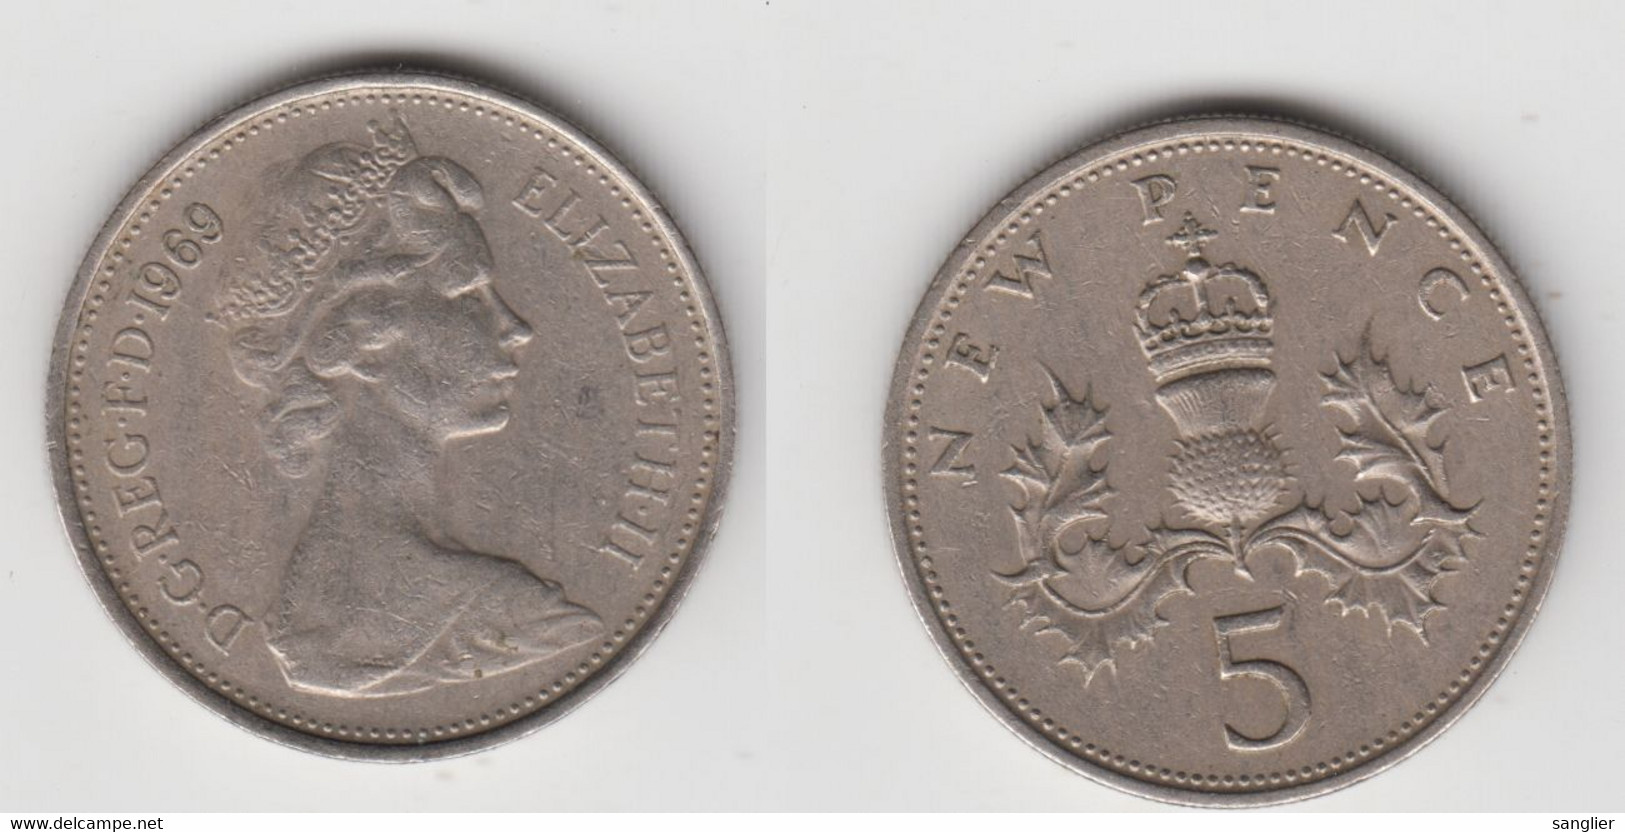 5 NEW PENCE 1969 - 5 Pence & 5 New Pence